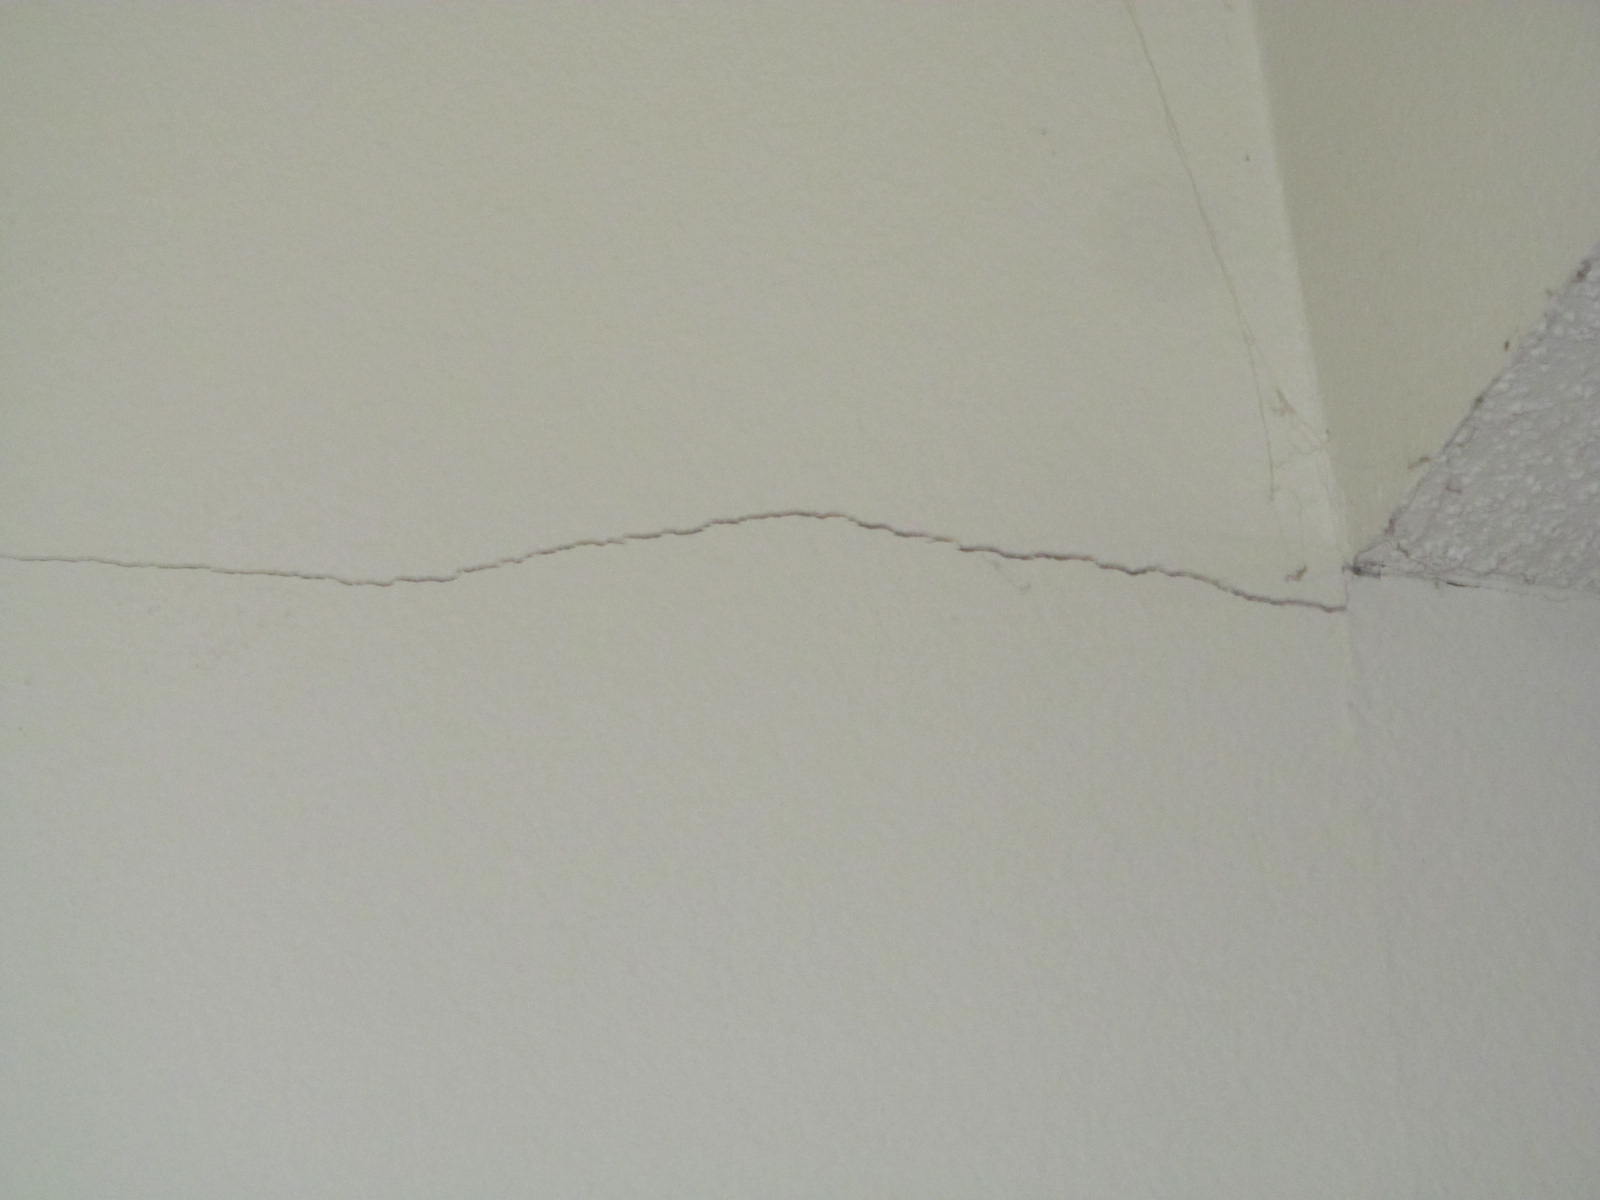 Drywall Cracks - What causes cracking, when is it structural